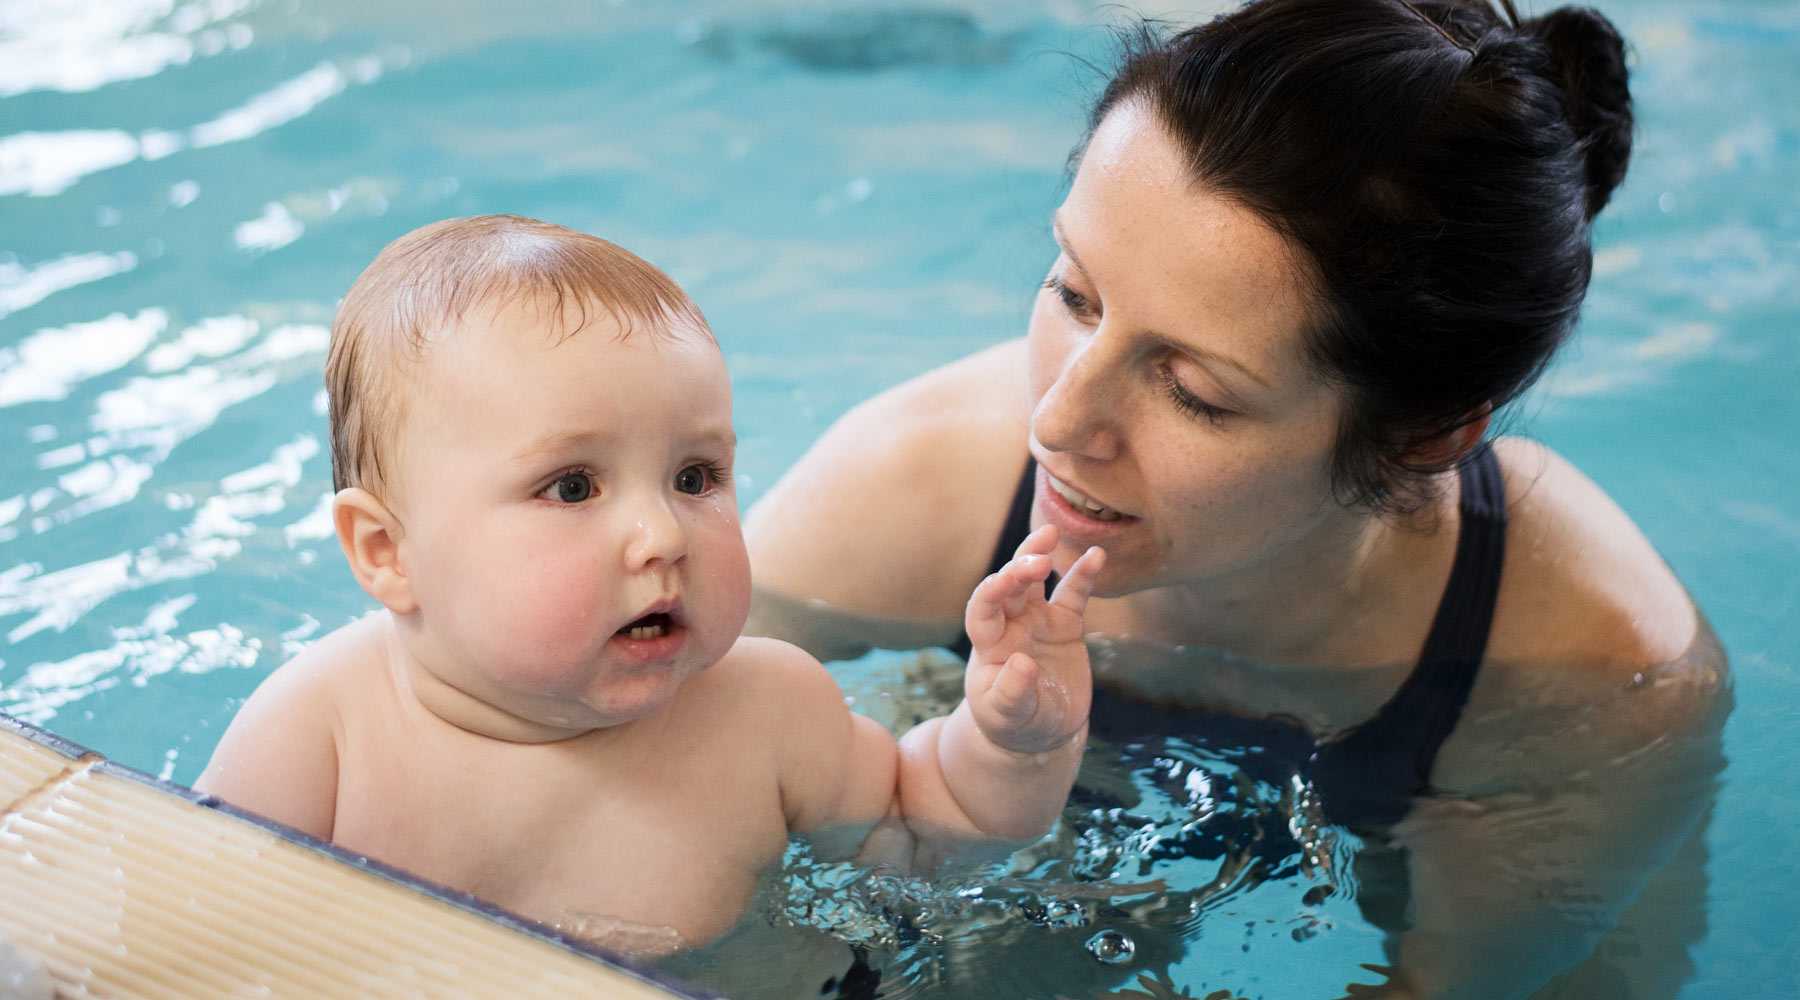 Baby swimming use only warm private swimming pools